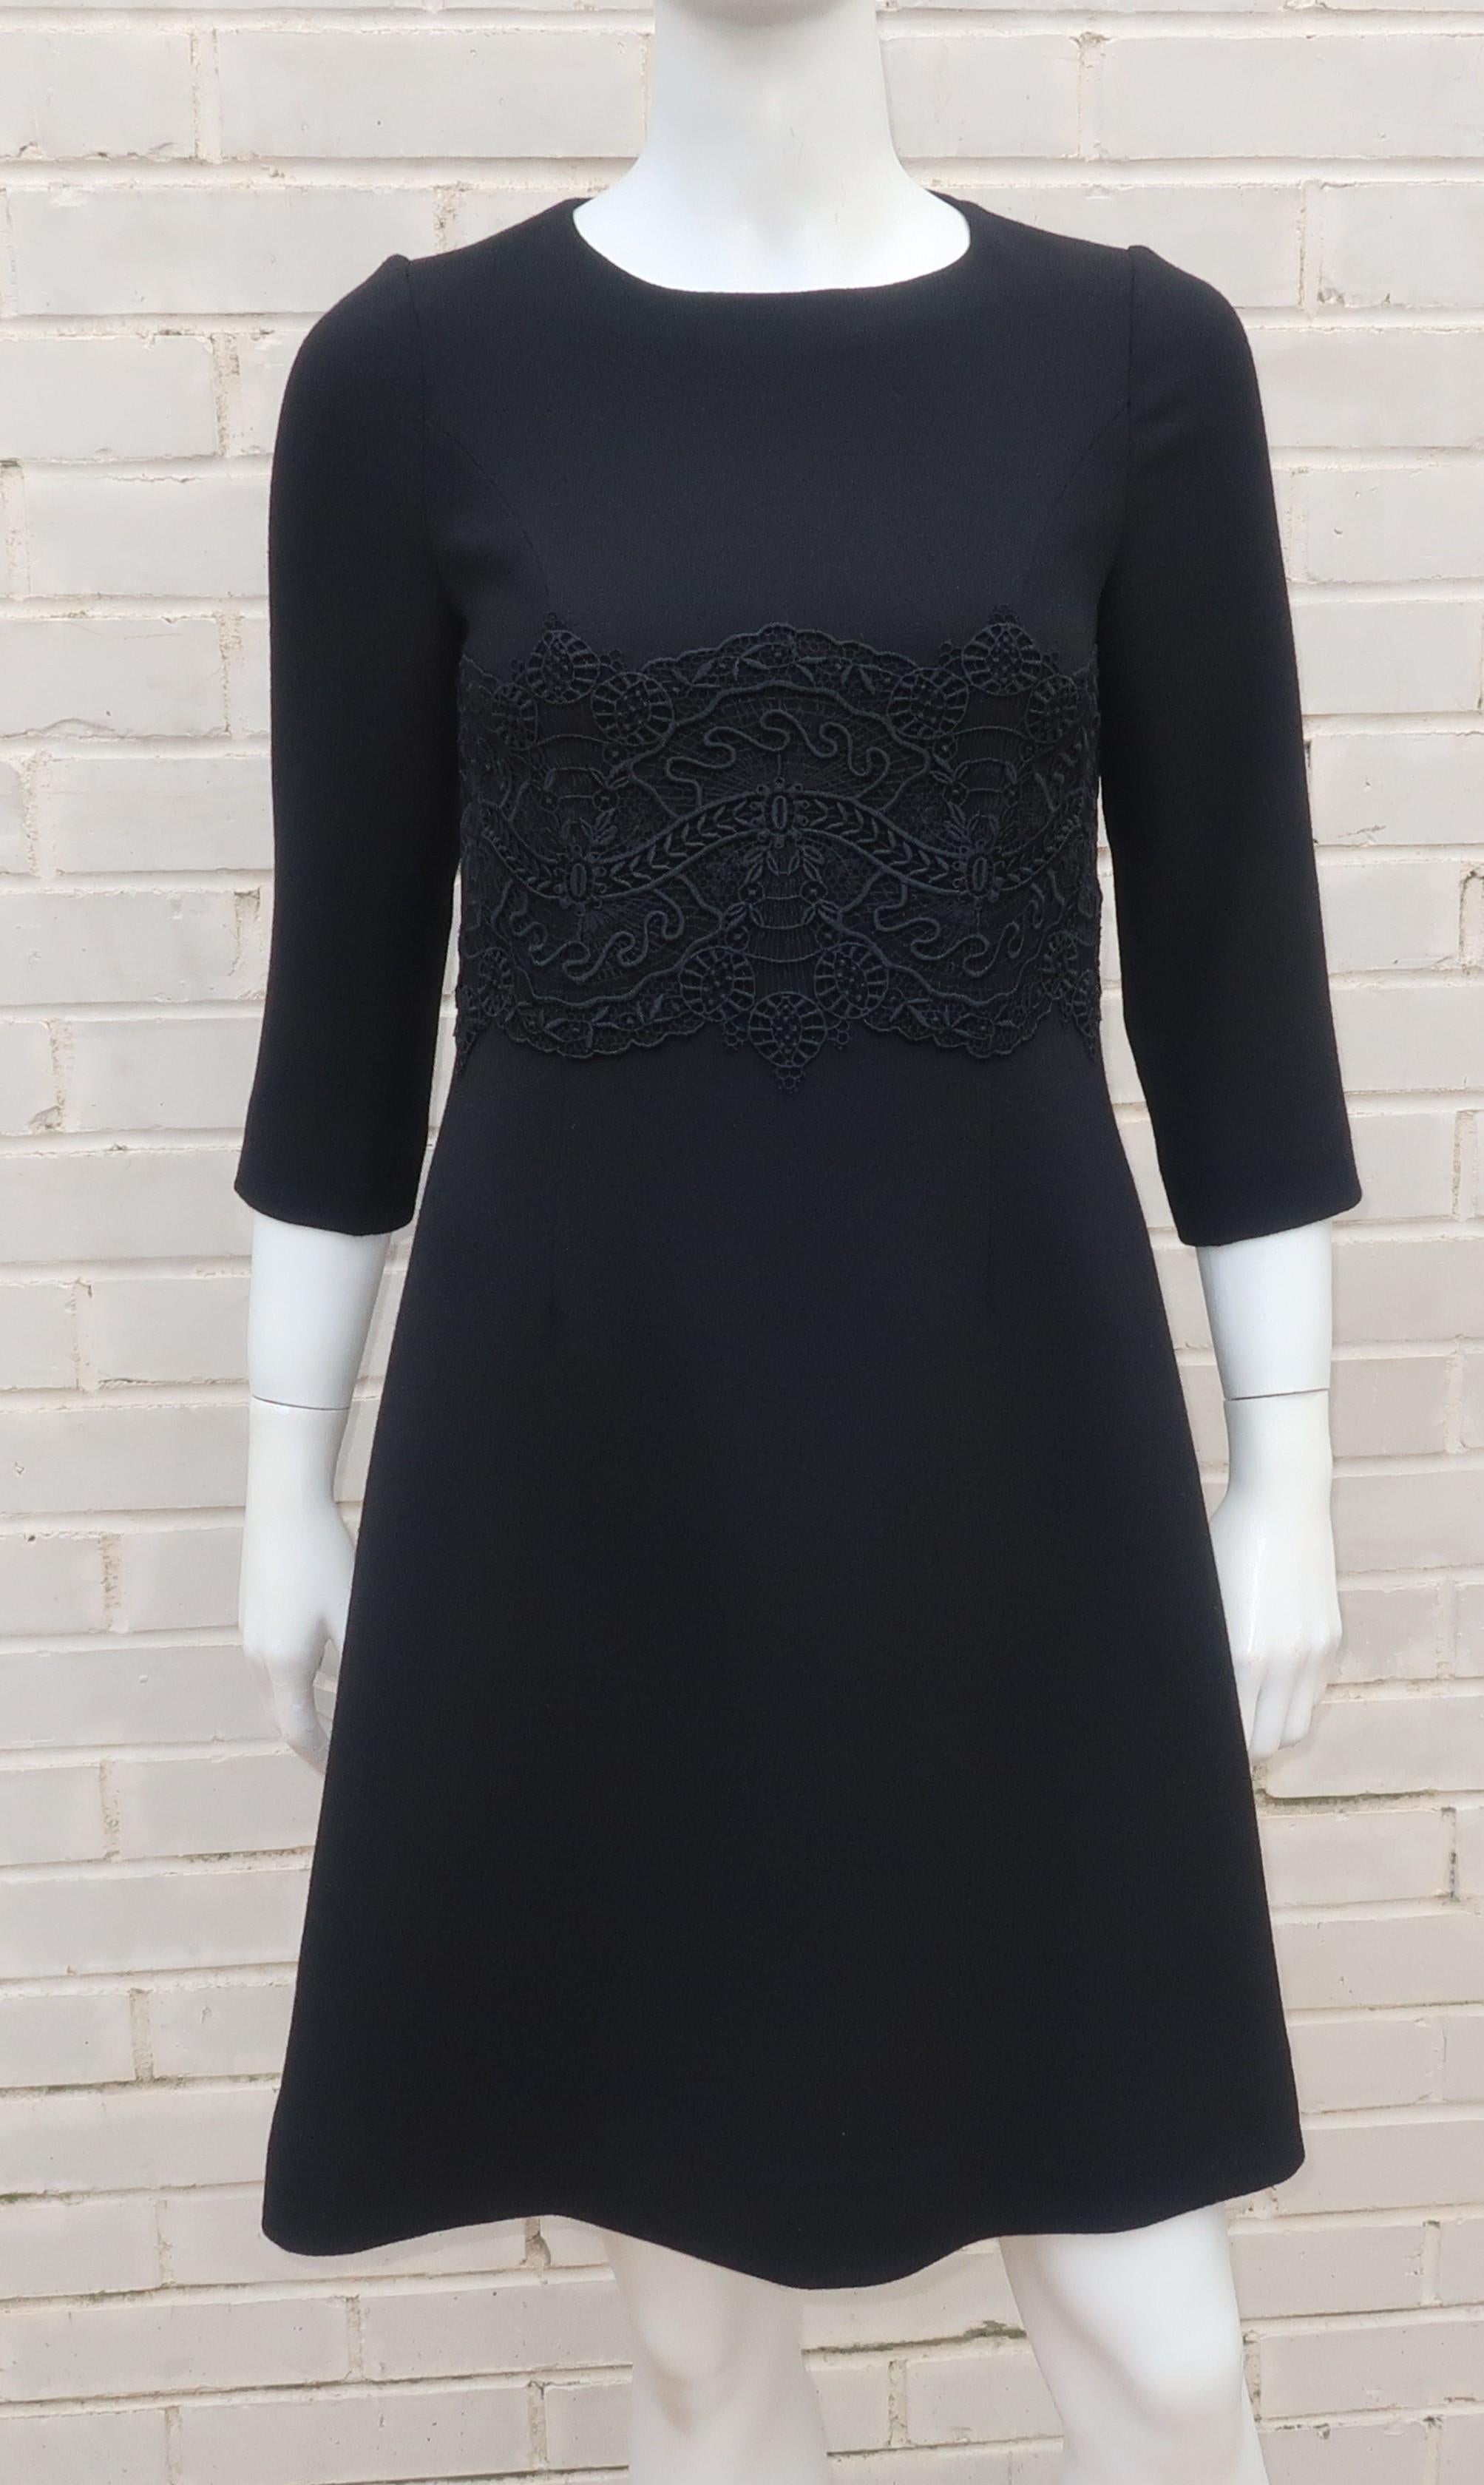 A modern twist on the 'little black dress' by a designer of ultra feminine styles, Peggy Jennings.  Ms. Jennings designs often include antique and handmade lace ... indeed this simple wool crepe a-line silhouette is beautifully accented by black